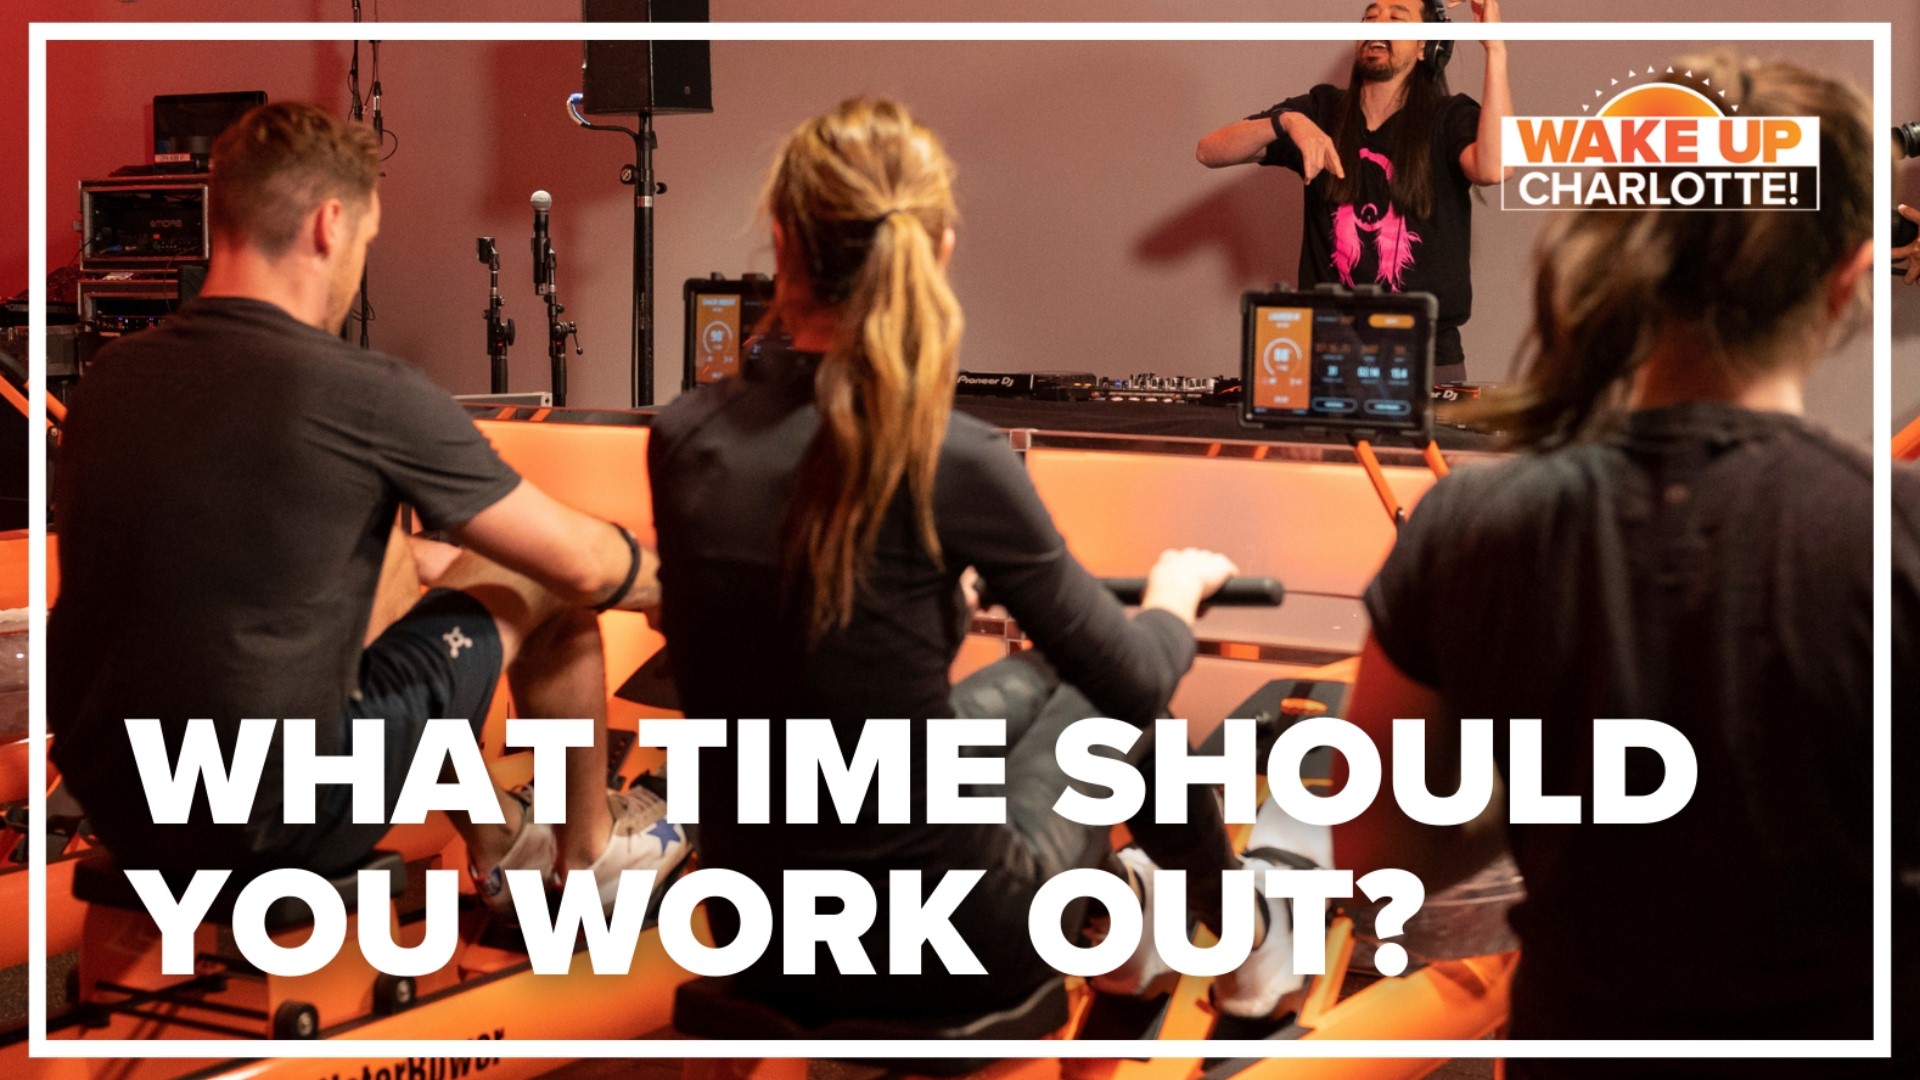 With summer in full swing, many are ramping up their workouts. Some wonder if you get a better work out in the morning or at night?